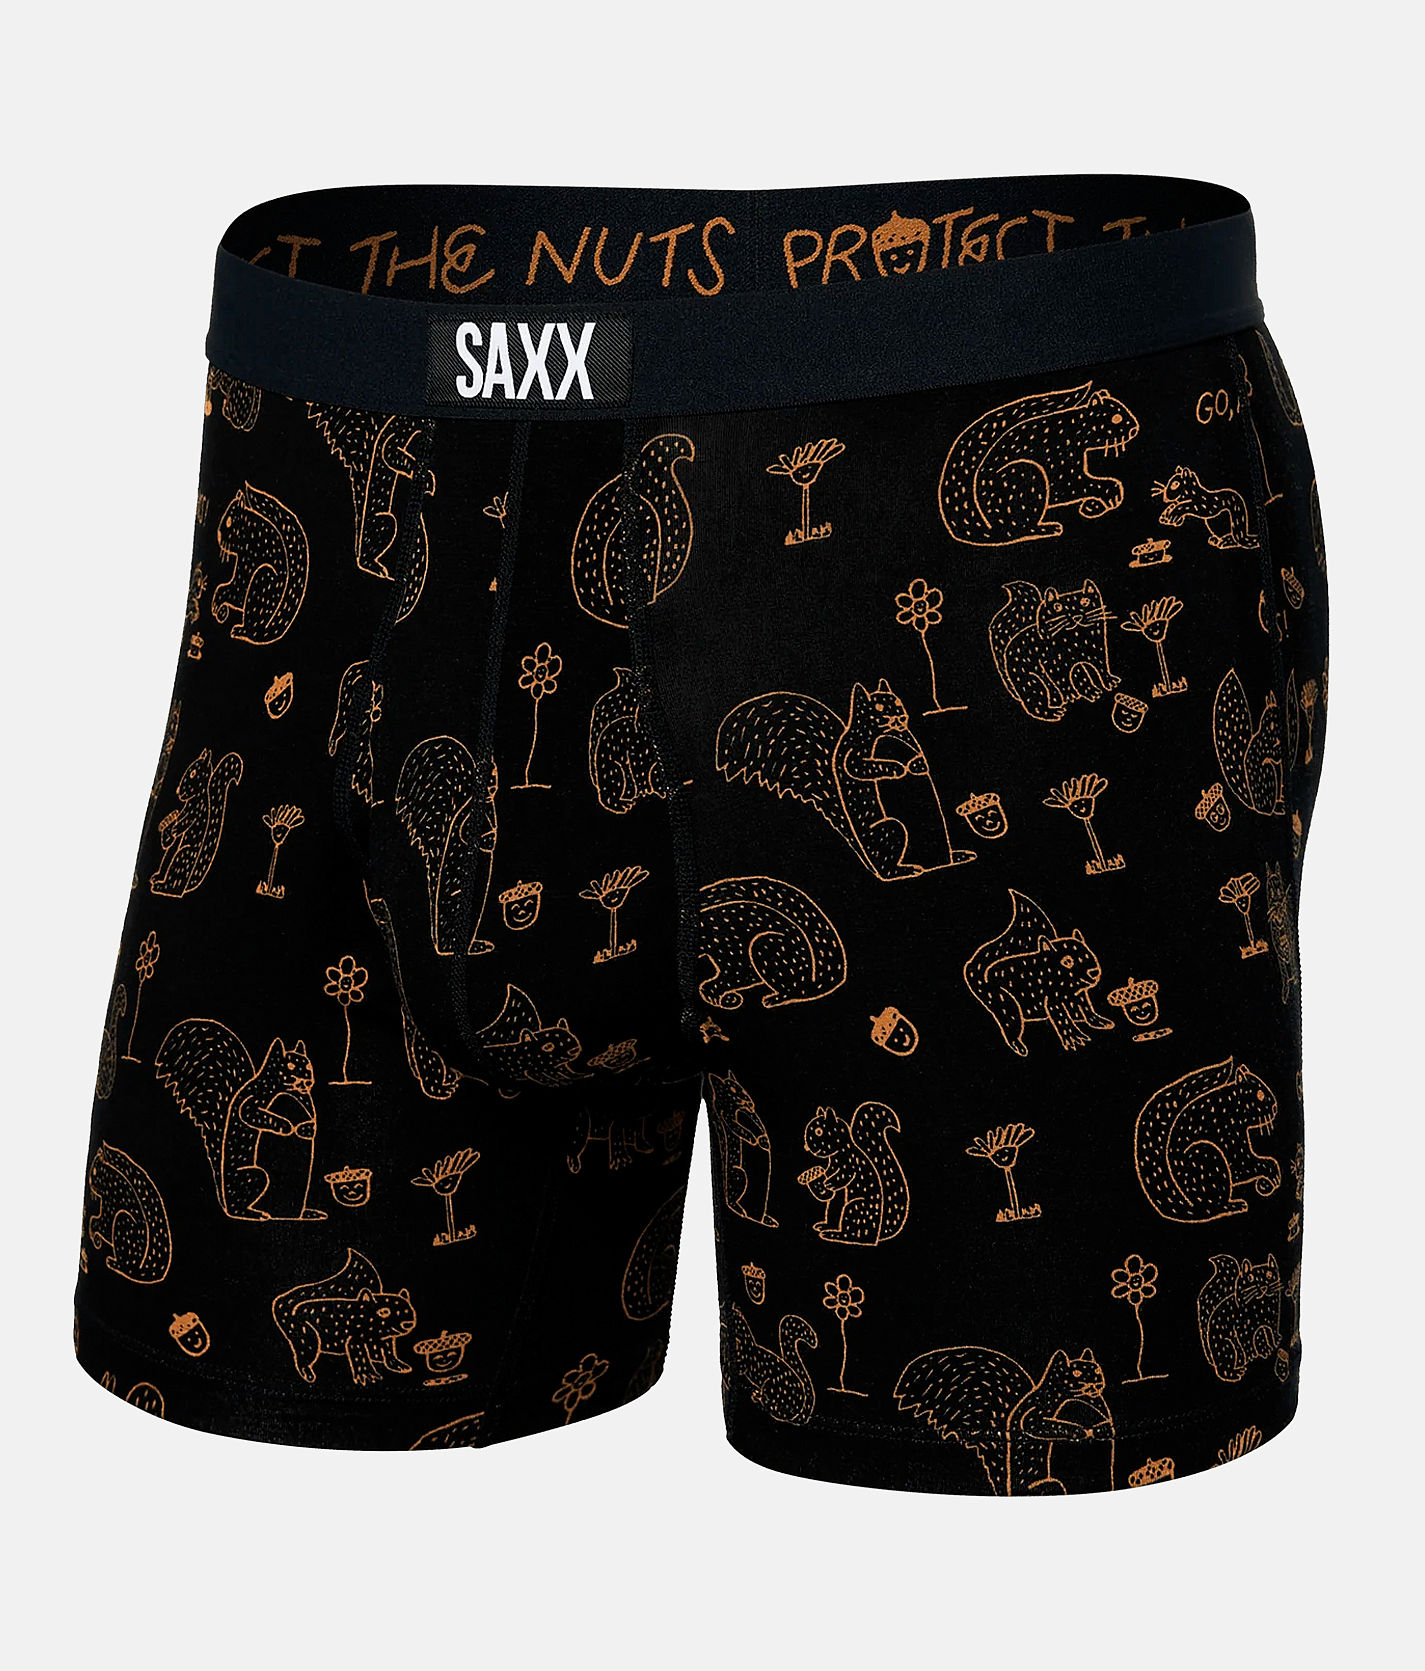 Saxx Men's Underwear -Daytripper Loose Boxers with Built-in Pouch Support-  Underwear for Men, Fall Black at  Men's Clothing store